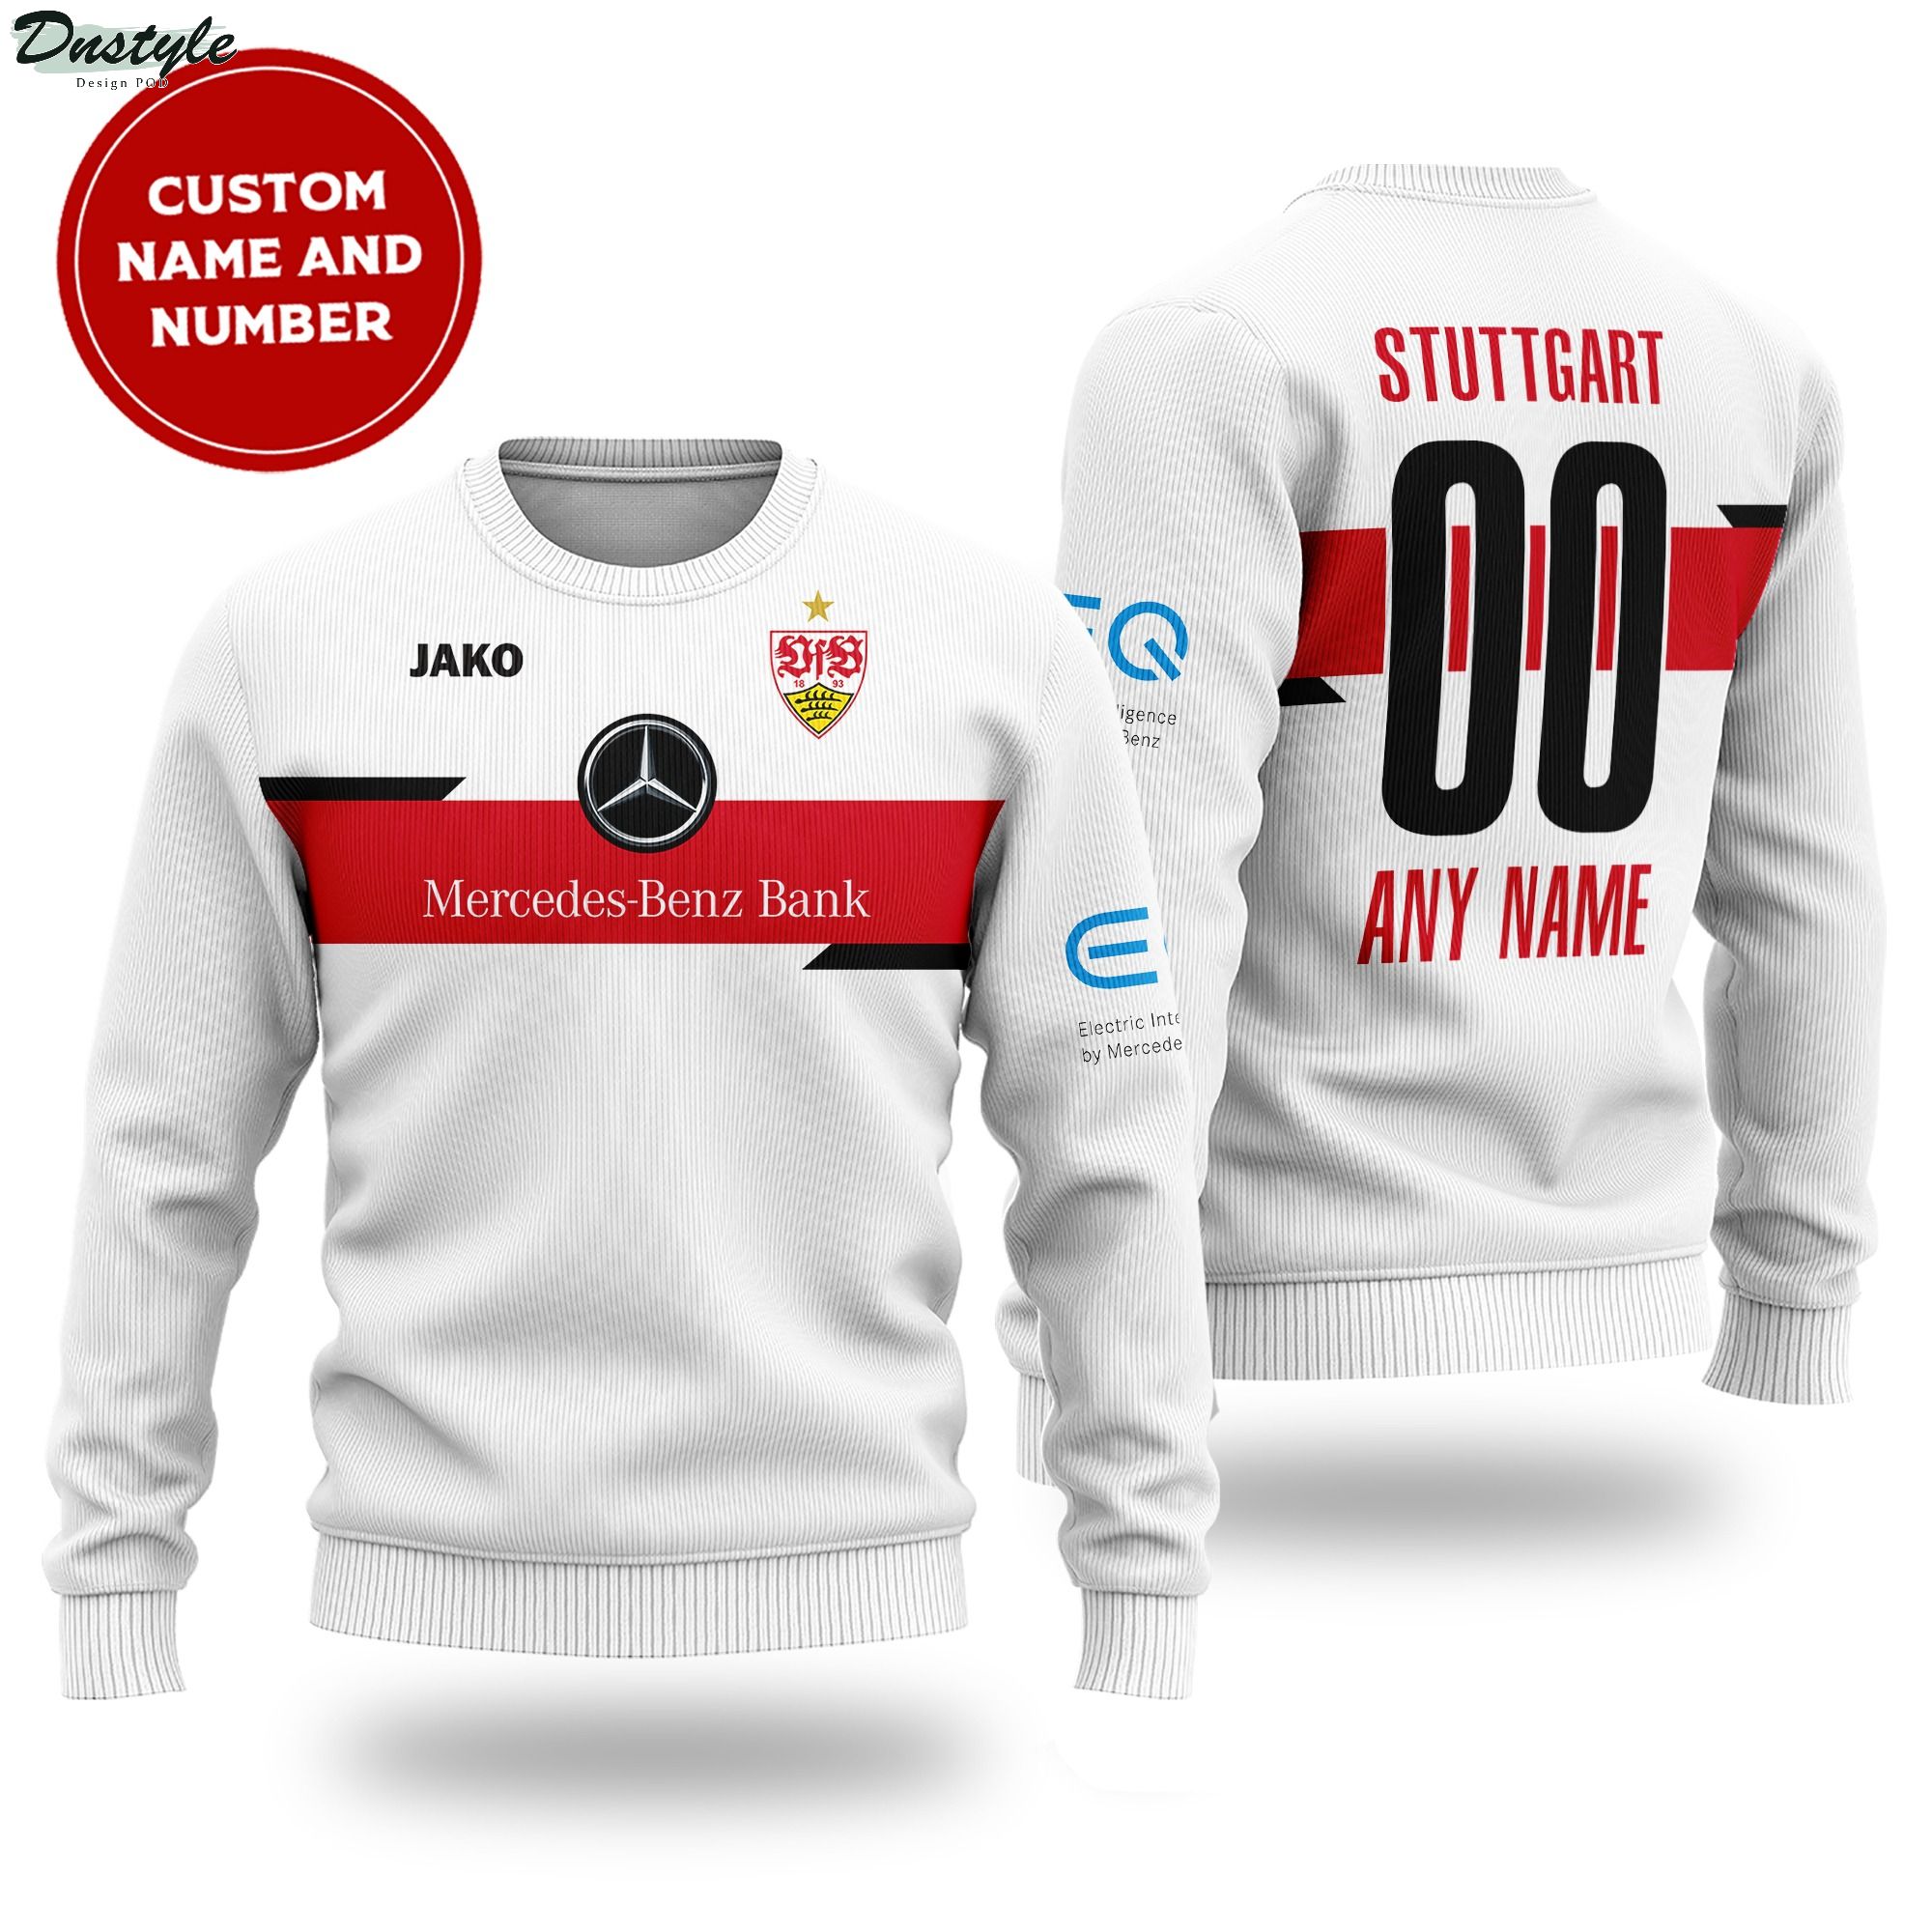 Stuttgart custom name and number ugly sweater